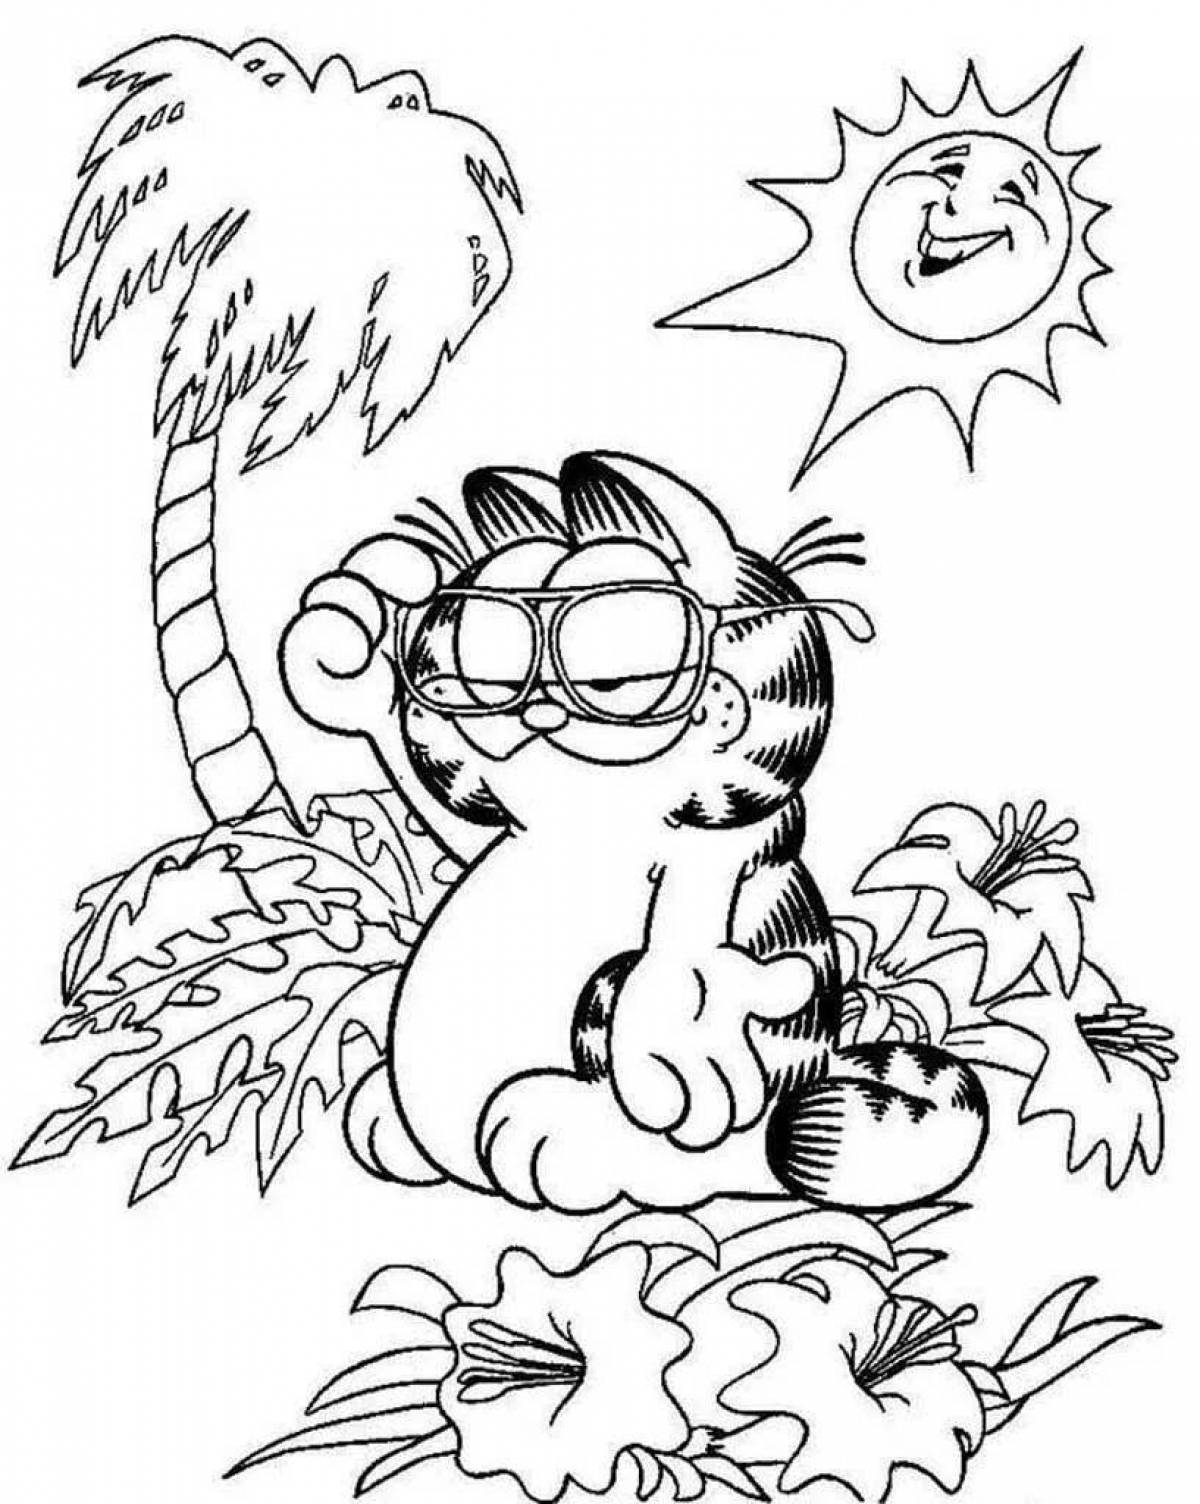 Colorful garfield coloring page